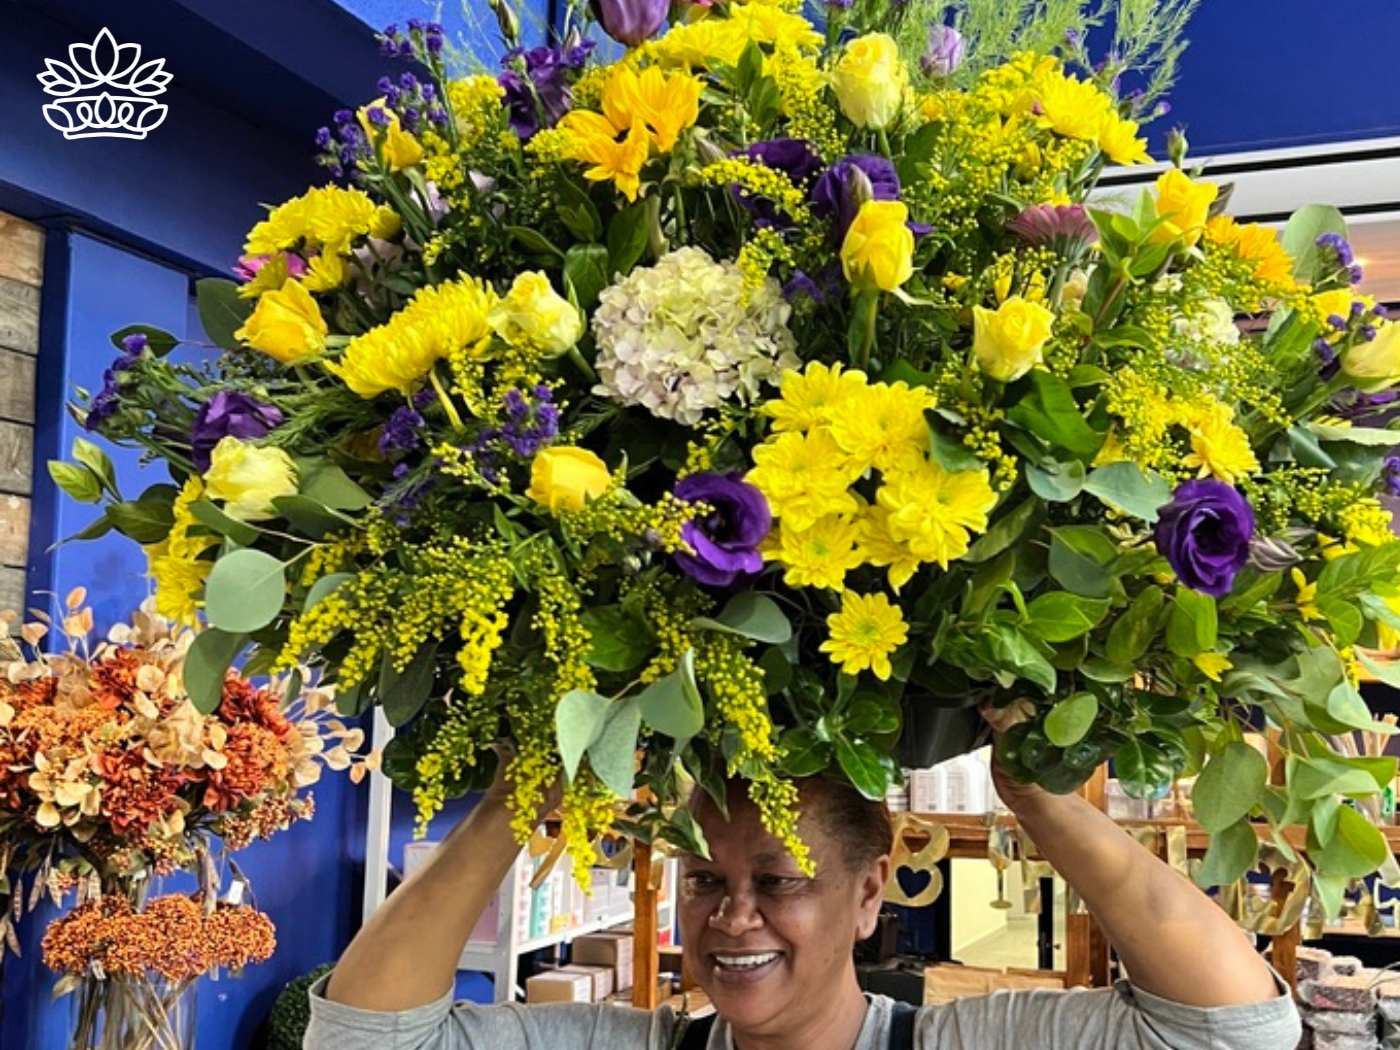 A smiling florist in a flowers shop lifting a large and vibrant flower arrangement of yellow and purple flowers overhead, showcasing an exquisite display from the Flowers By Occasion Collection at Fabulous Flowers and Gifts.